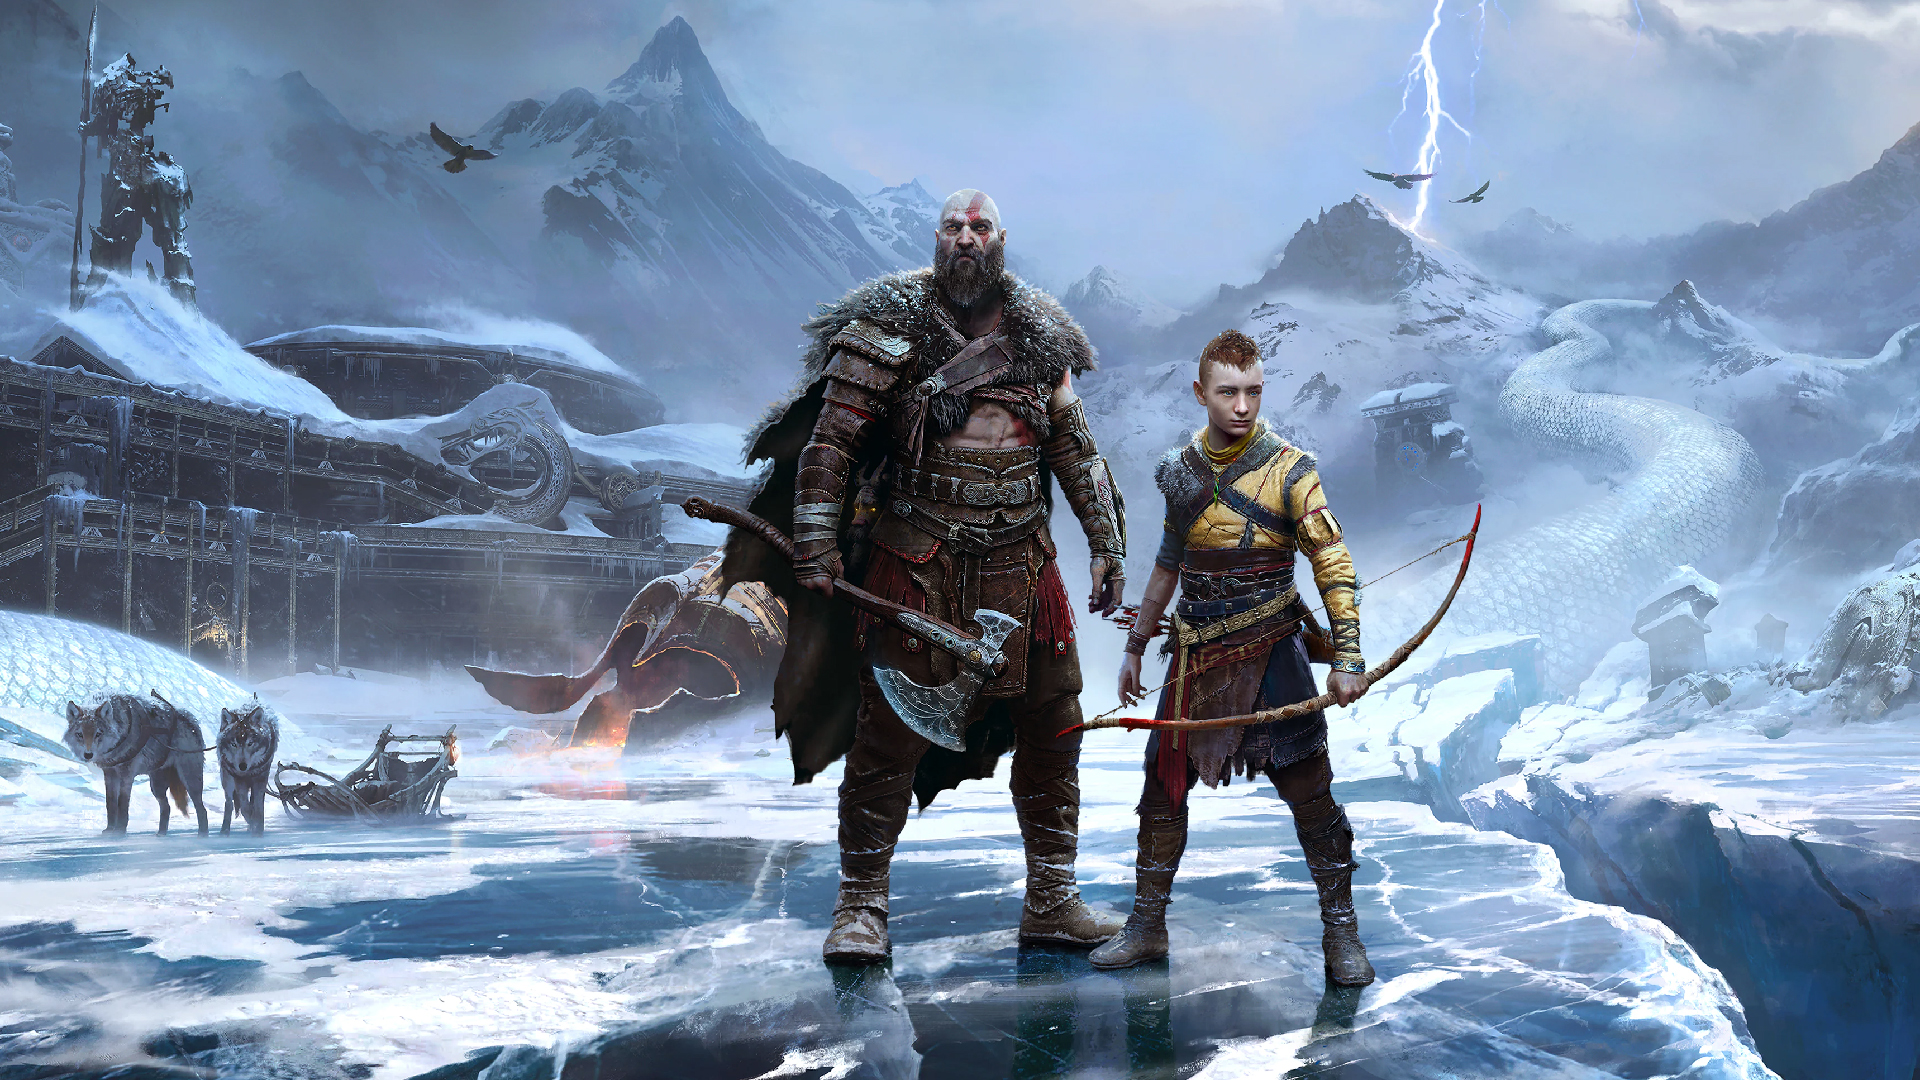 Kratos and Atreus stand on an ice shelf in artwork from God of War Ragnarok